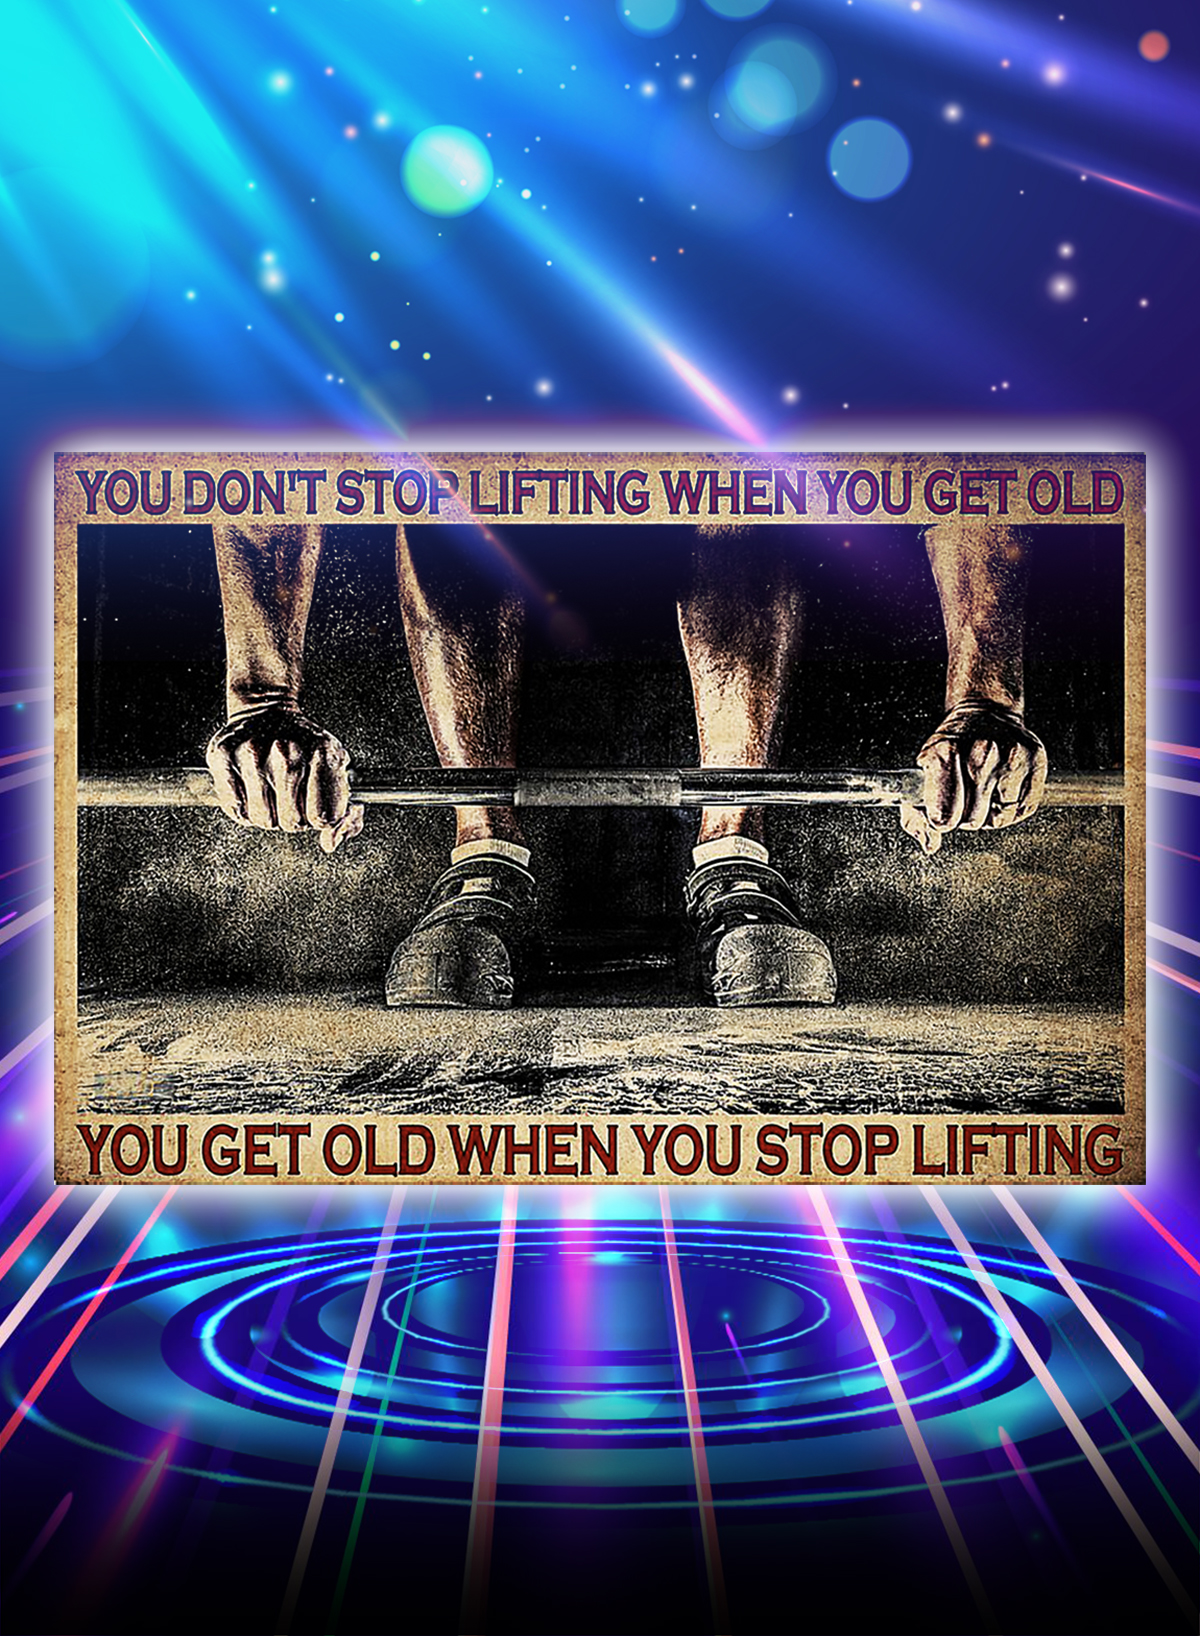 Fitness you don't stop lifting when you get old poster - A1